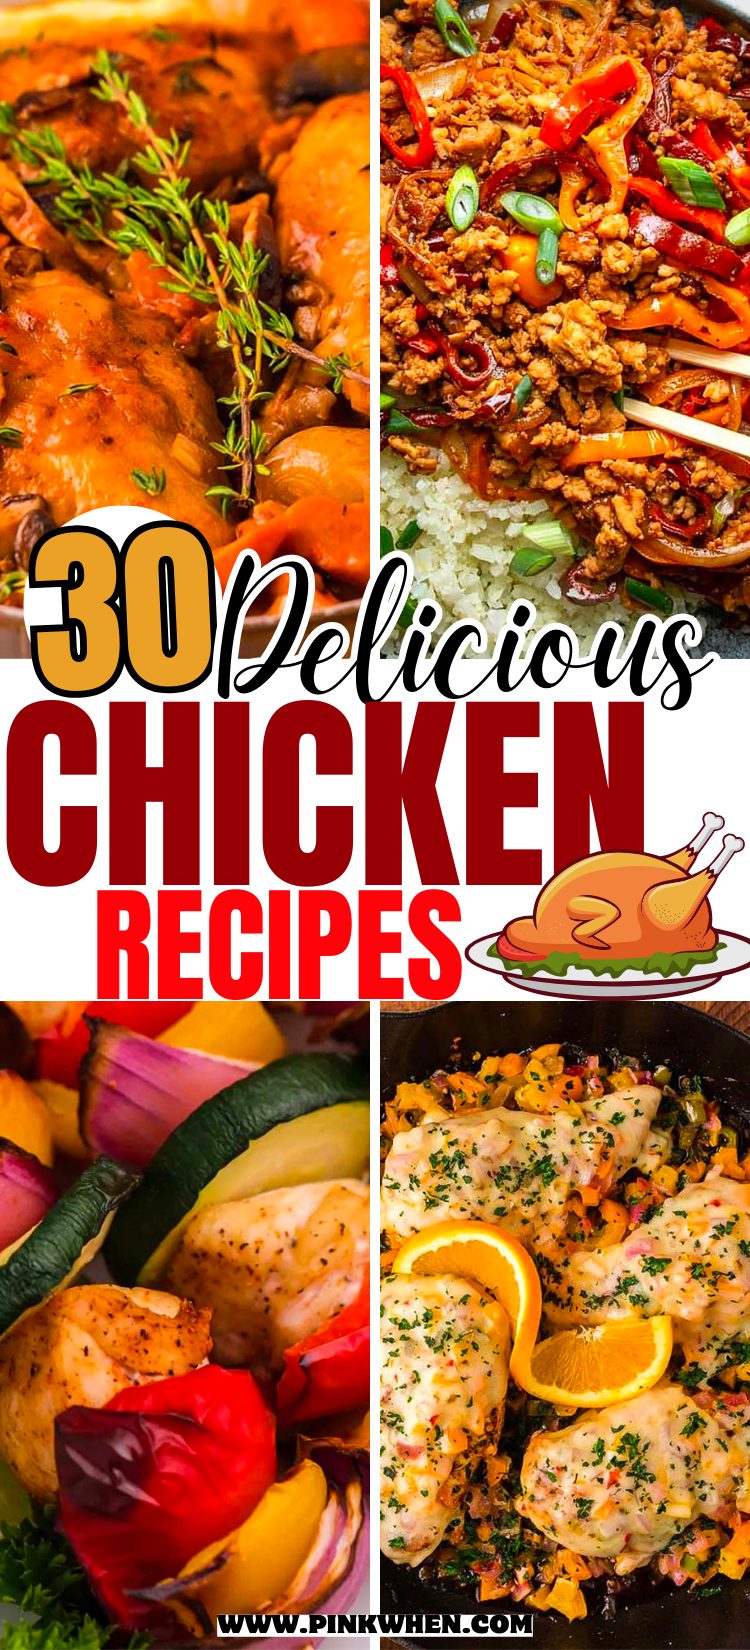 30 Delicious Chicken Recipes to Try Now